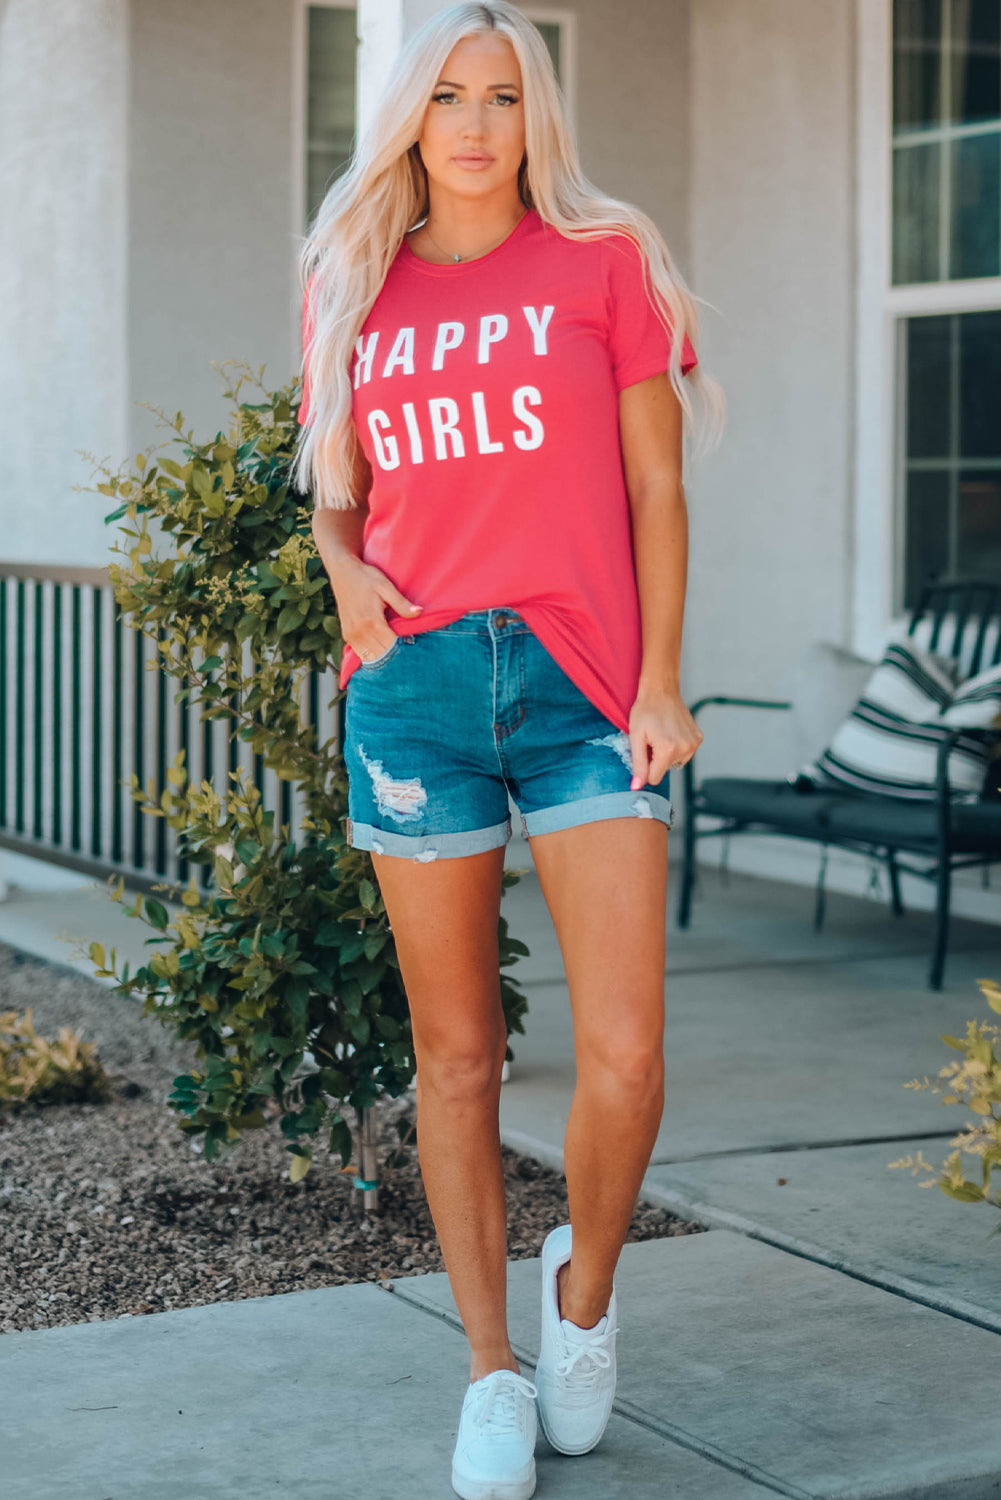 Uylee’s Boutique HAPPY GIRLS Short Sleeve Tee Shirt (Mommy and Me Top)